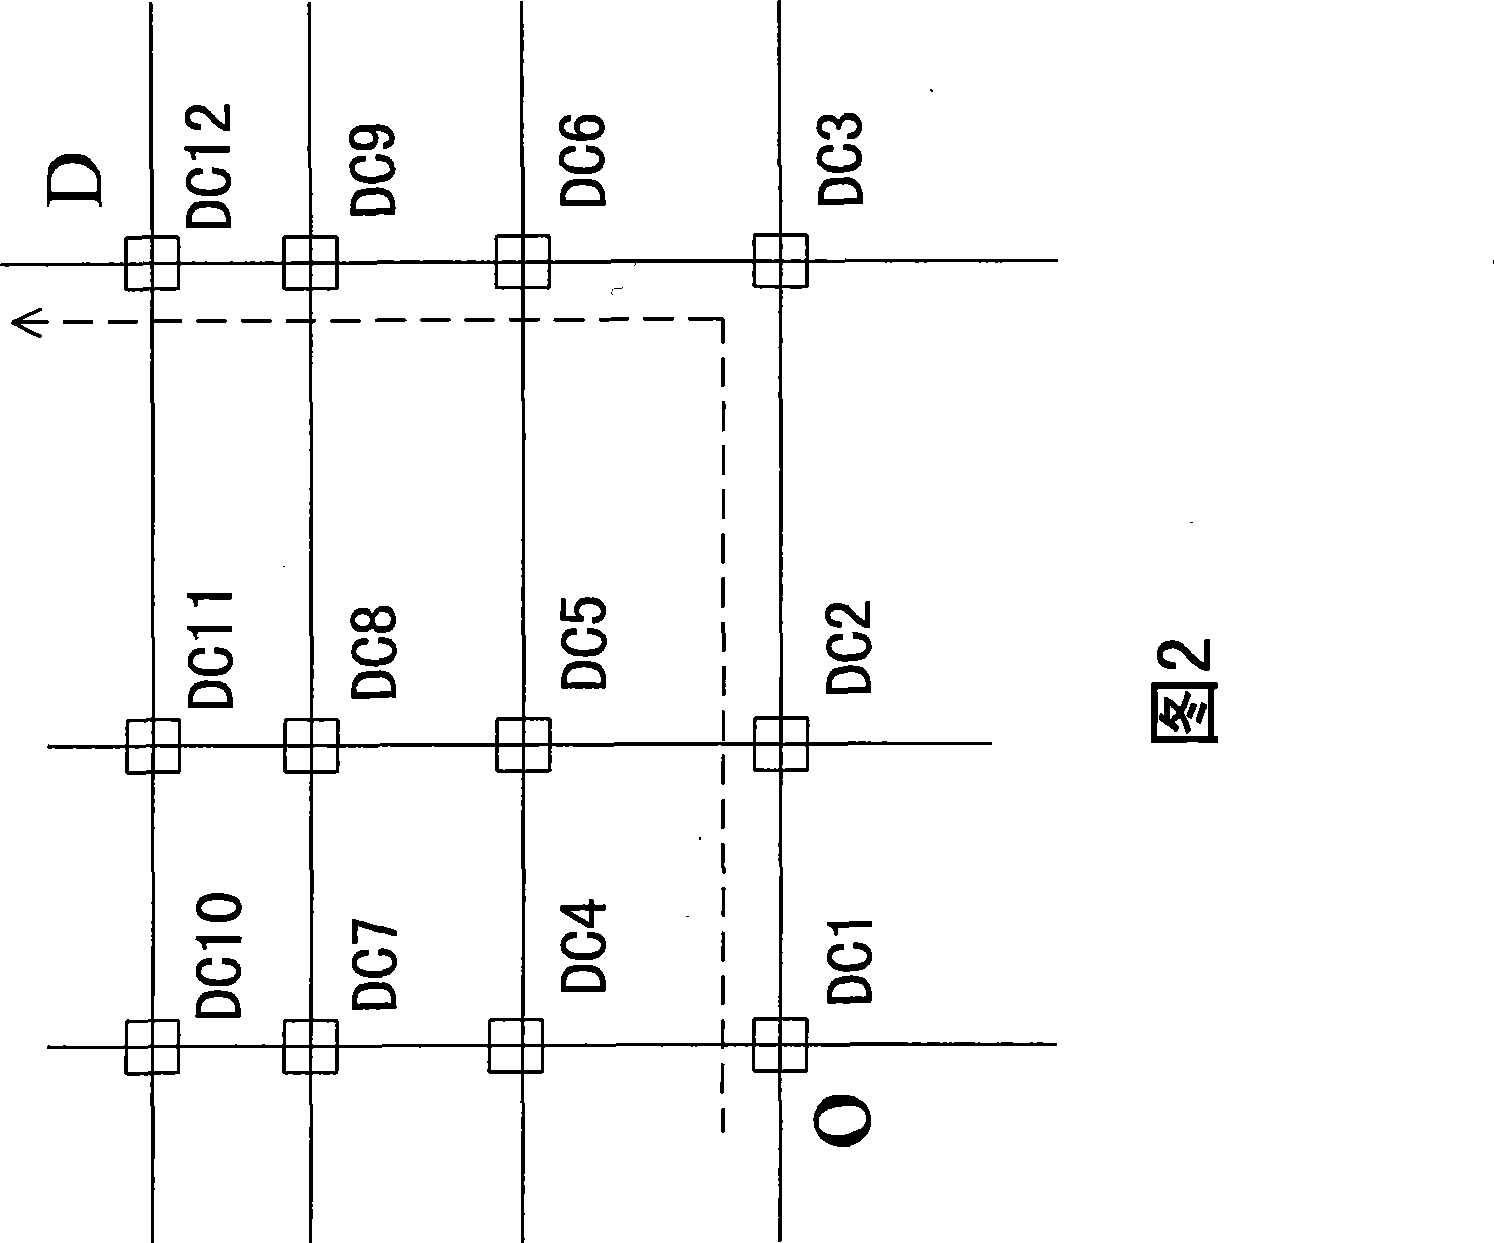 License plate data processing method based on traffic information extraction computation